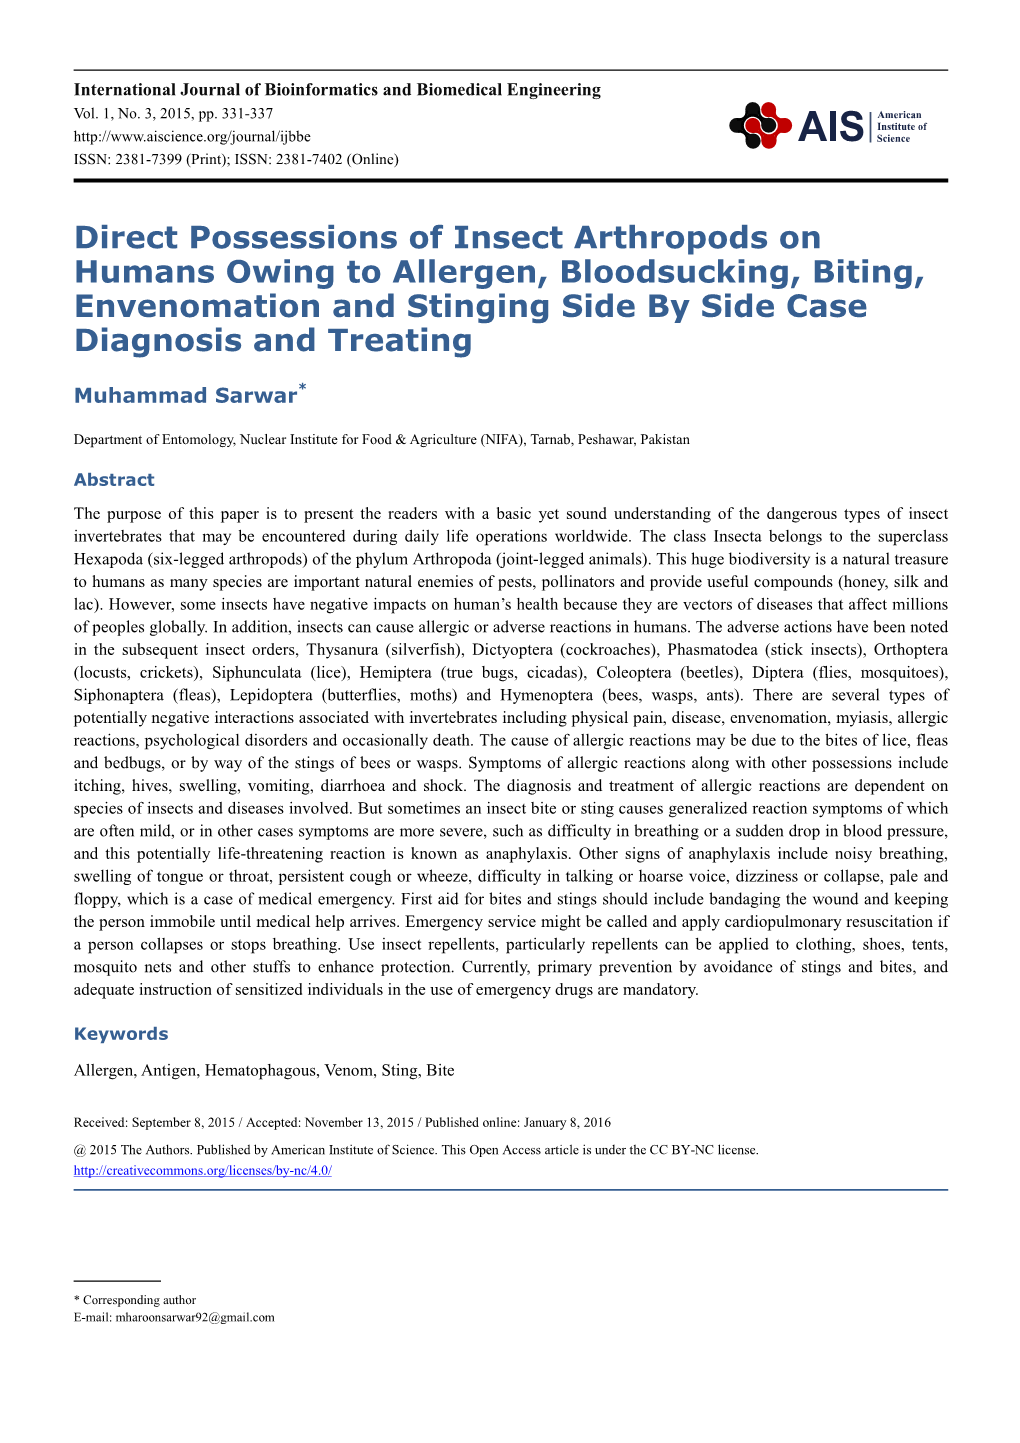 Direct Possessions of Insect Arthropods on Humans Owing to Allergen, Bloodsucking, Biting, Envenomation and Stinging Side by Side Case Diagnosis and Treating